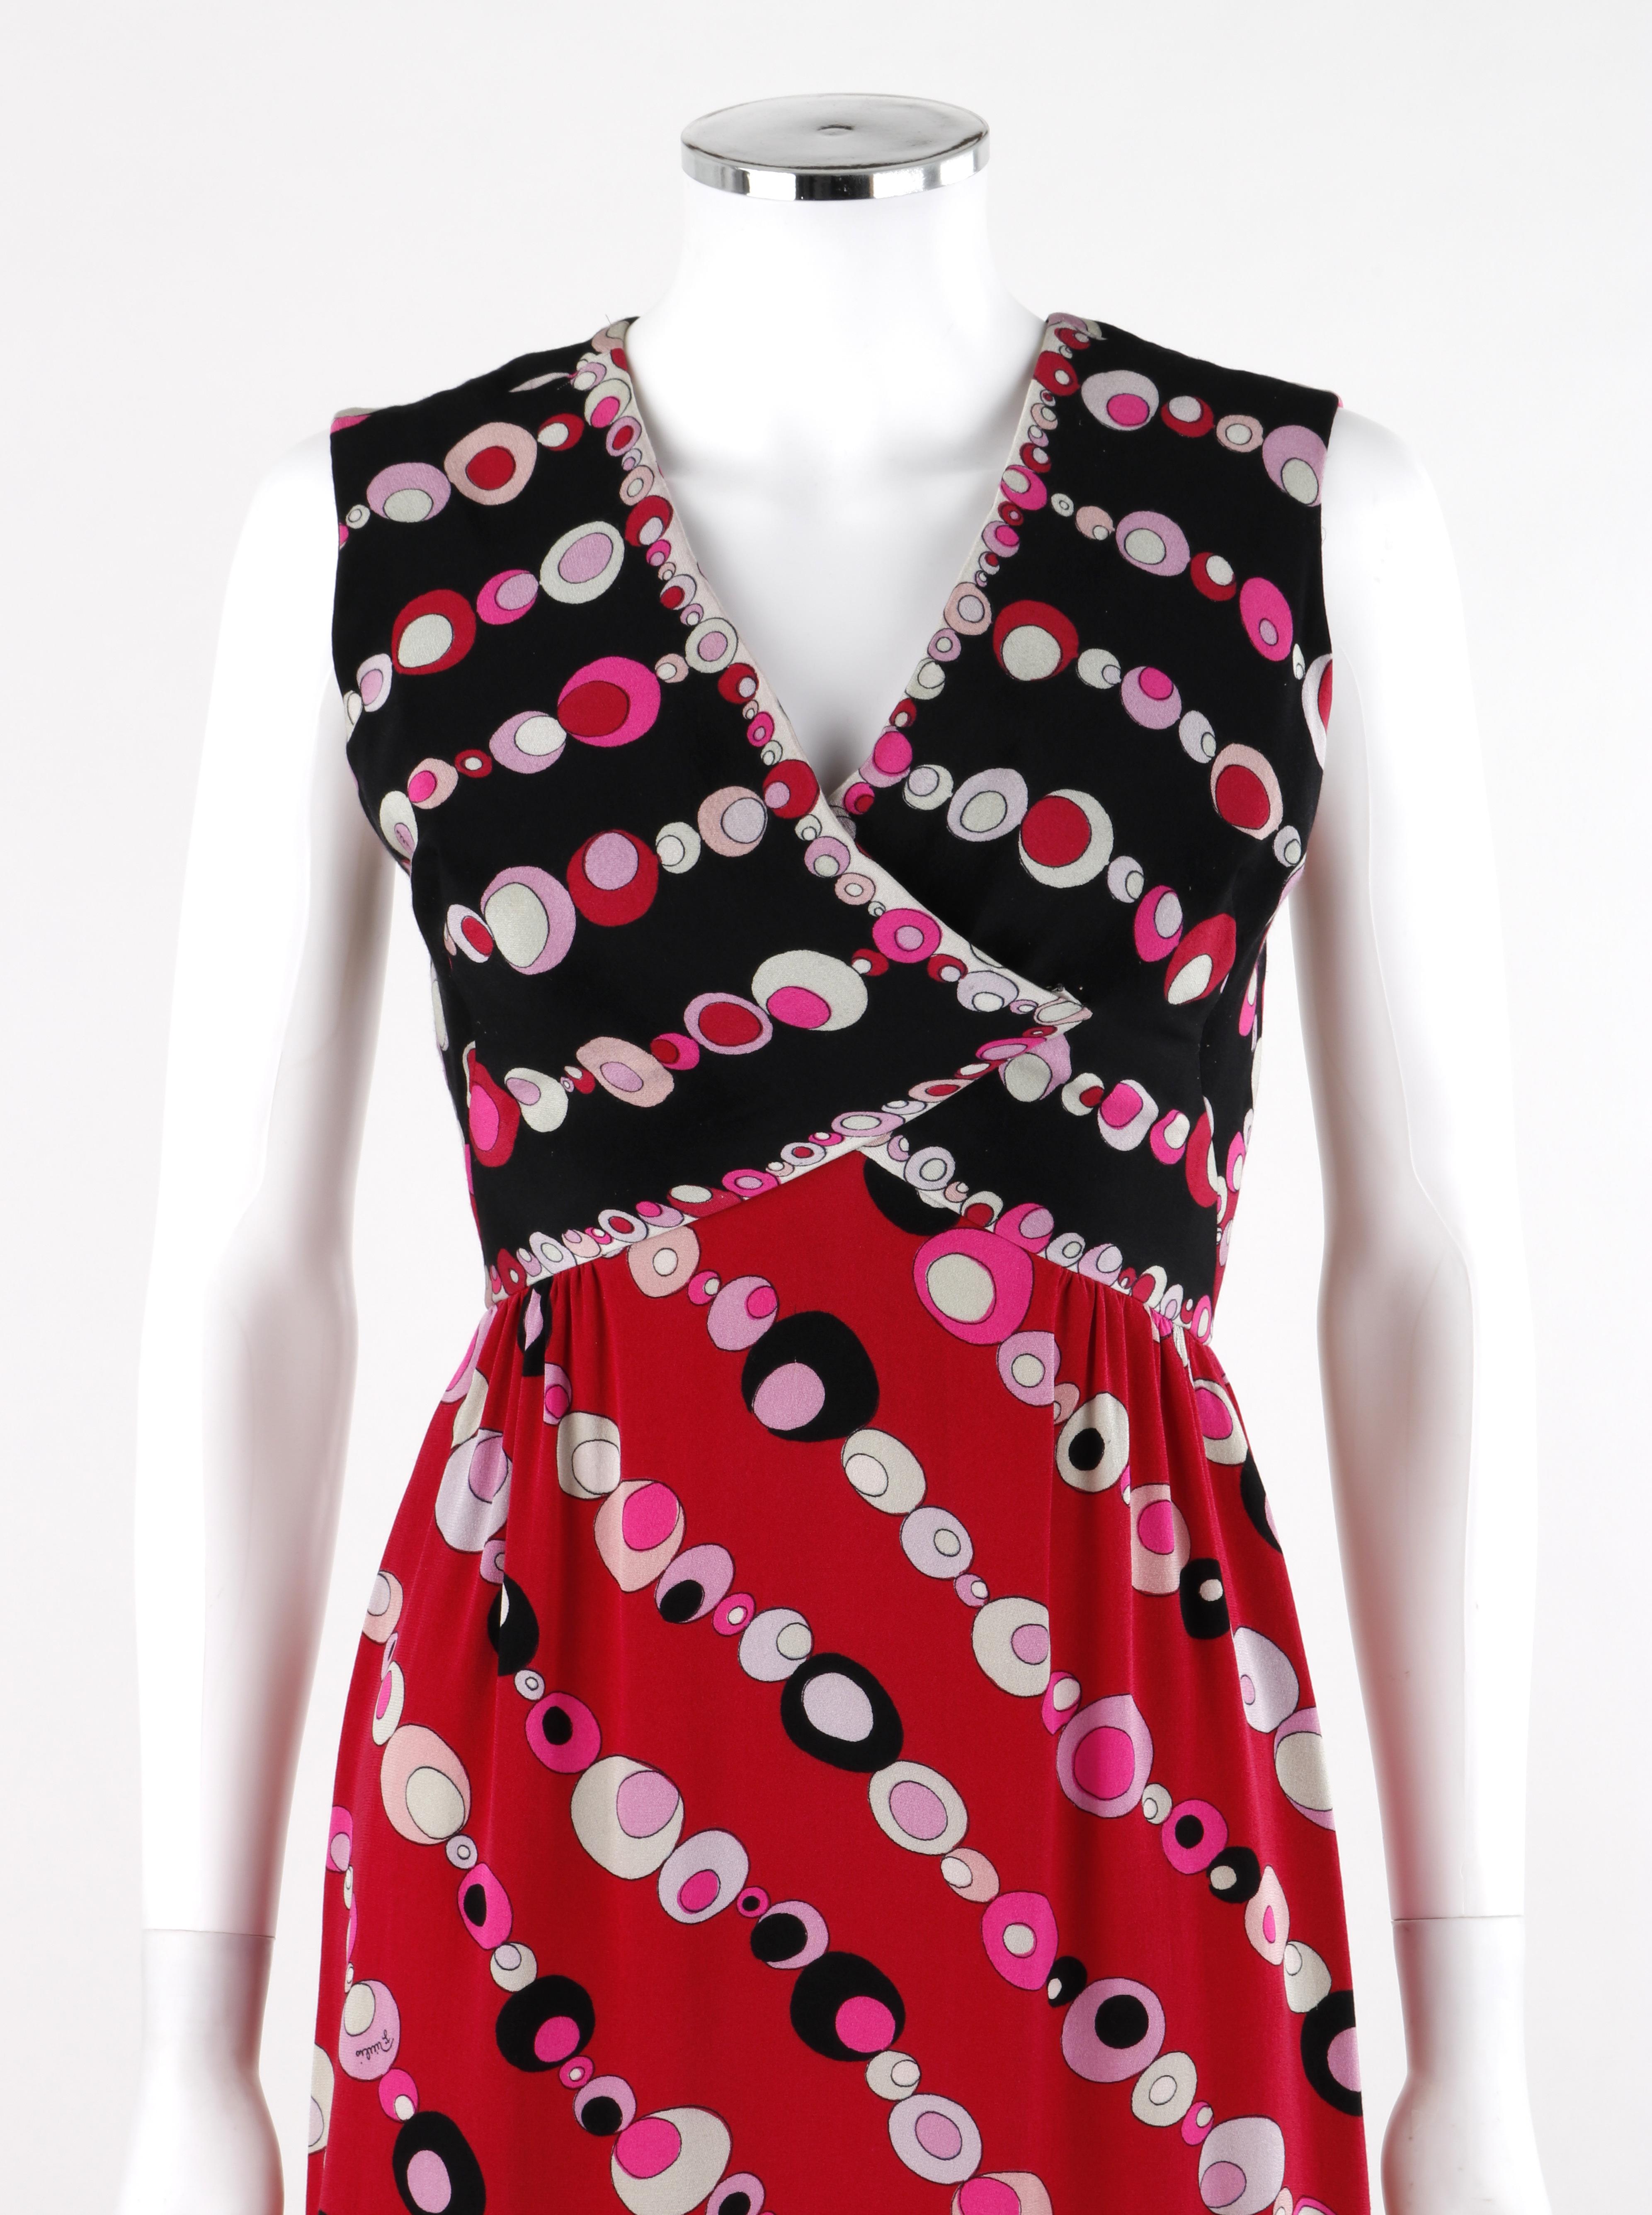 EMILIO PUCCI c.1960s Pearl Strands Signature Print Silk Sleeveless Sheath Dress
 
Circa: 1960’s
Label(s): Emilio Pucci
Designer: Emilio Pucci
Style: Sheath dress
Color(s): Shades of pink, black, white (exterior, interior)
Lined: No
Marked Fabric